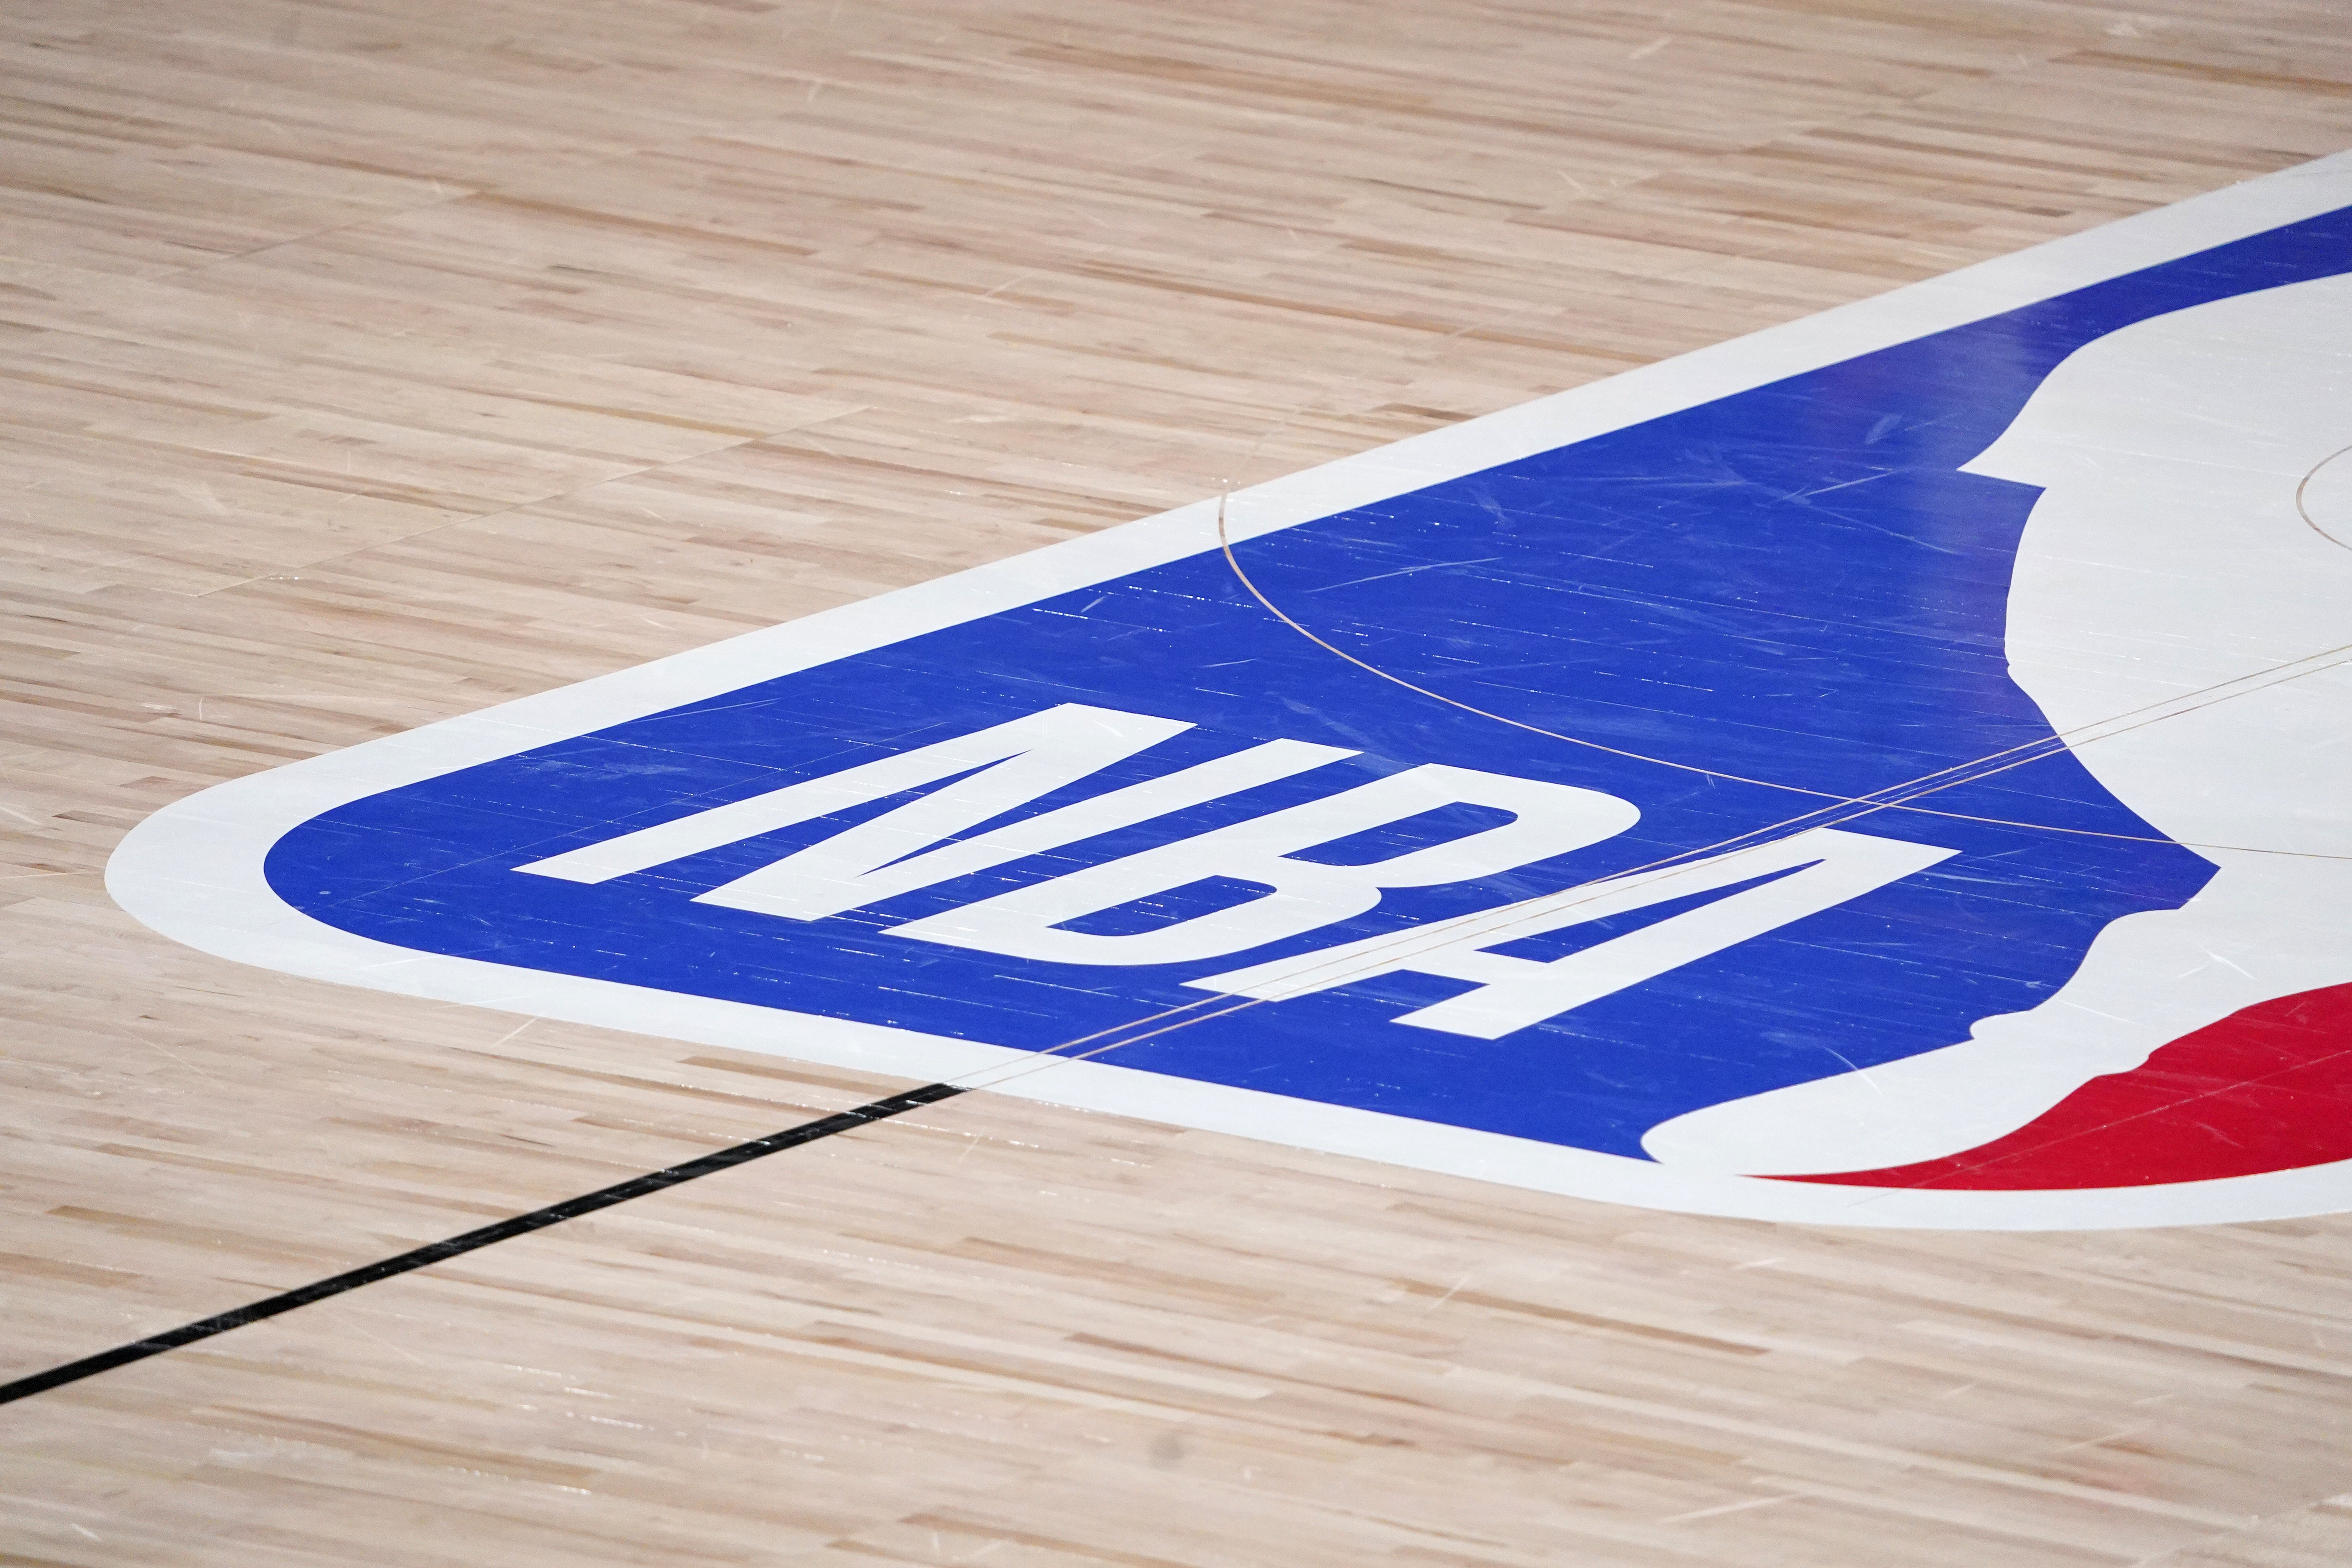 Nba 2022 Season Schedule Nba Schedule 2022: Regular Season, Playoffs, Finals And Key Dates  Reportedly Revealed | Bleacher Report | Latest News, Videos And Highlights